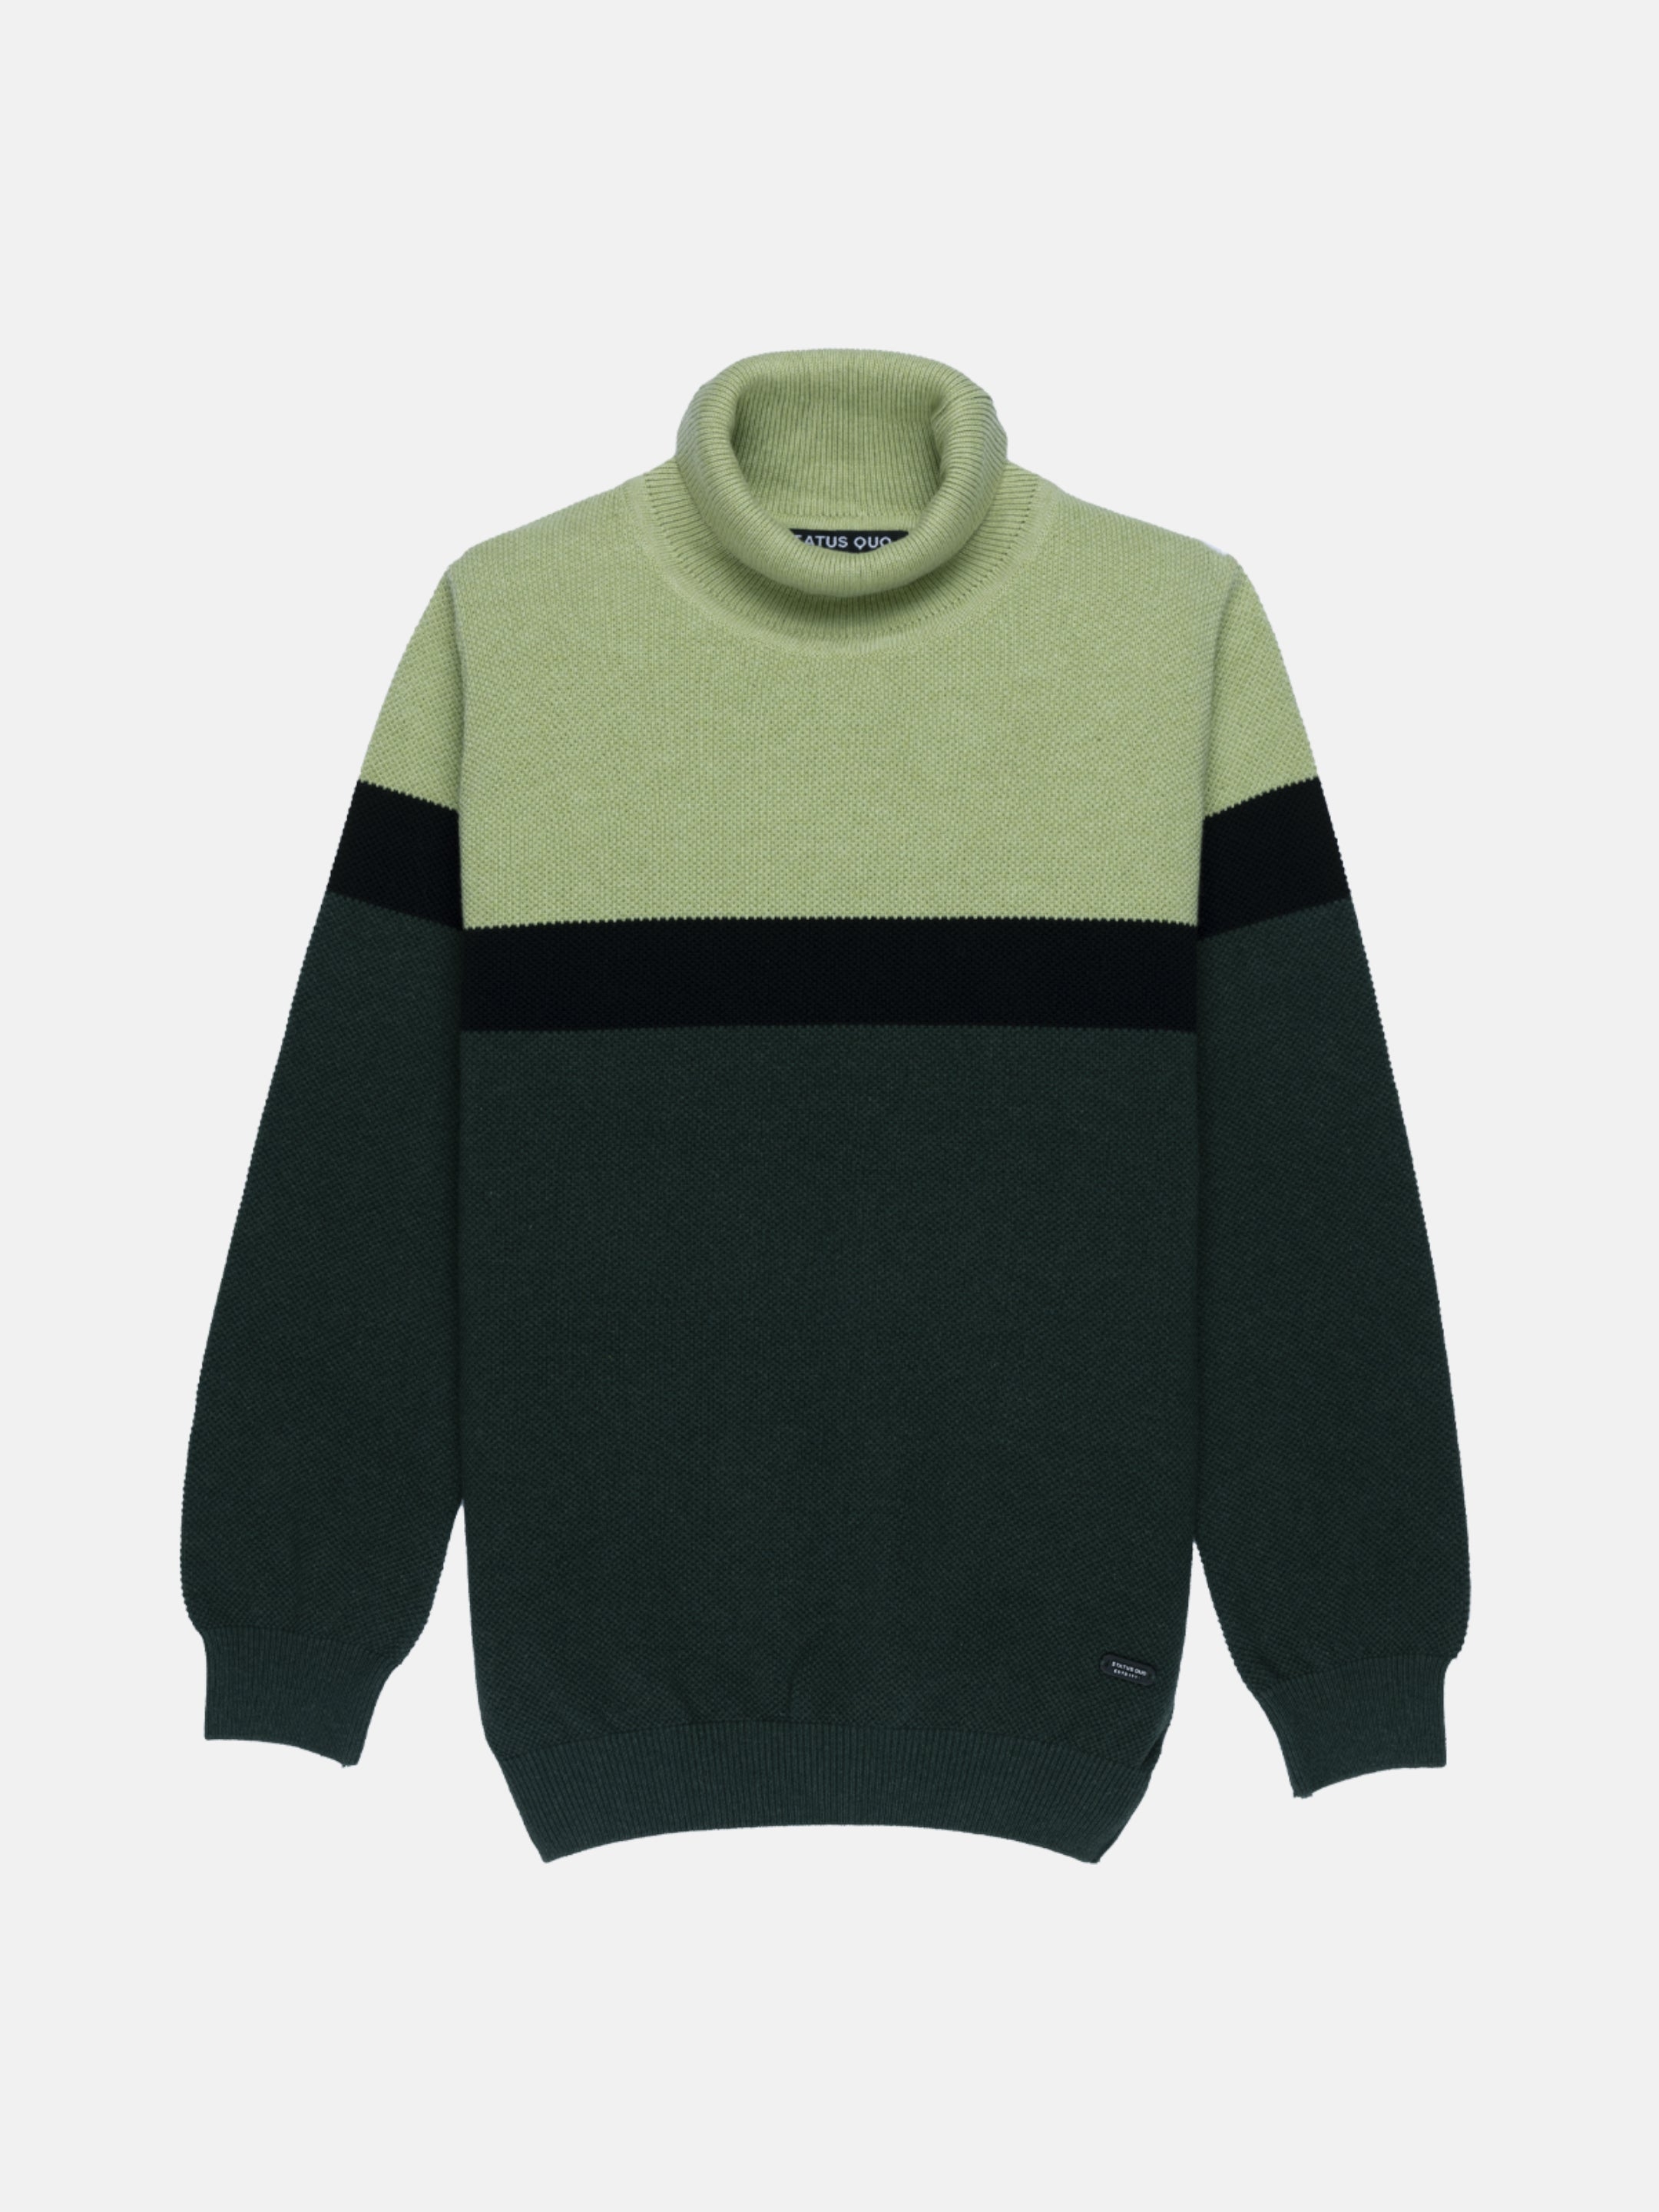 Boy's Green Cotton Solid Sweaters